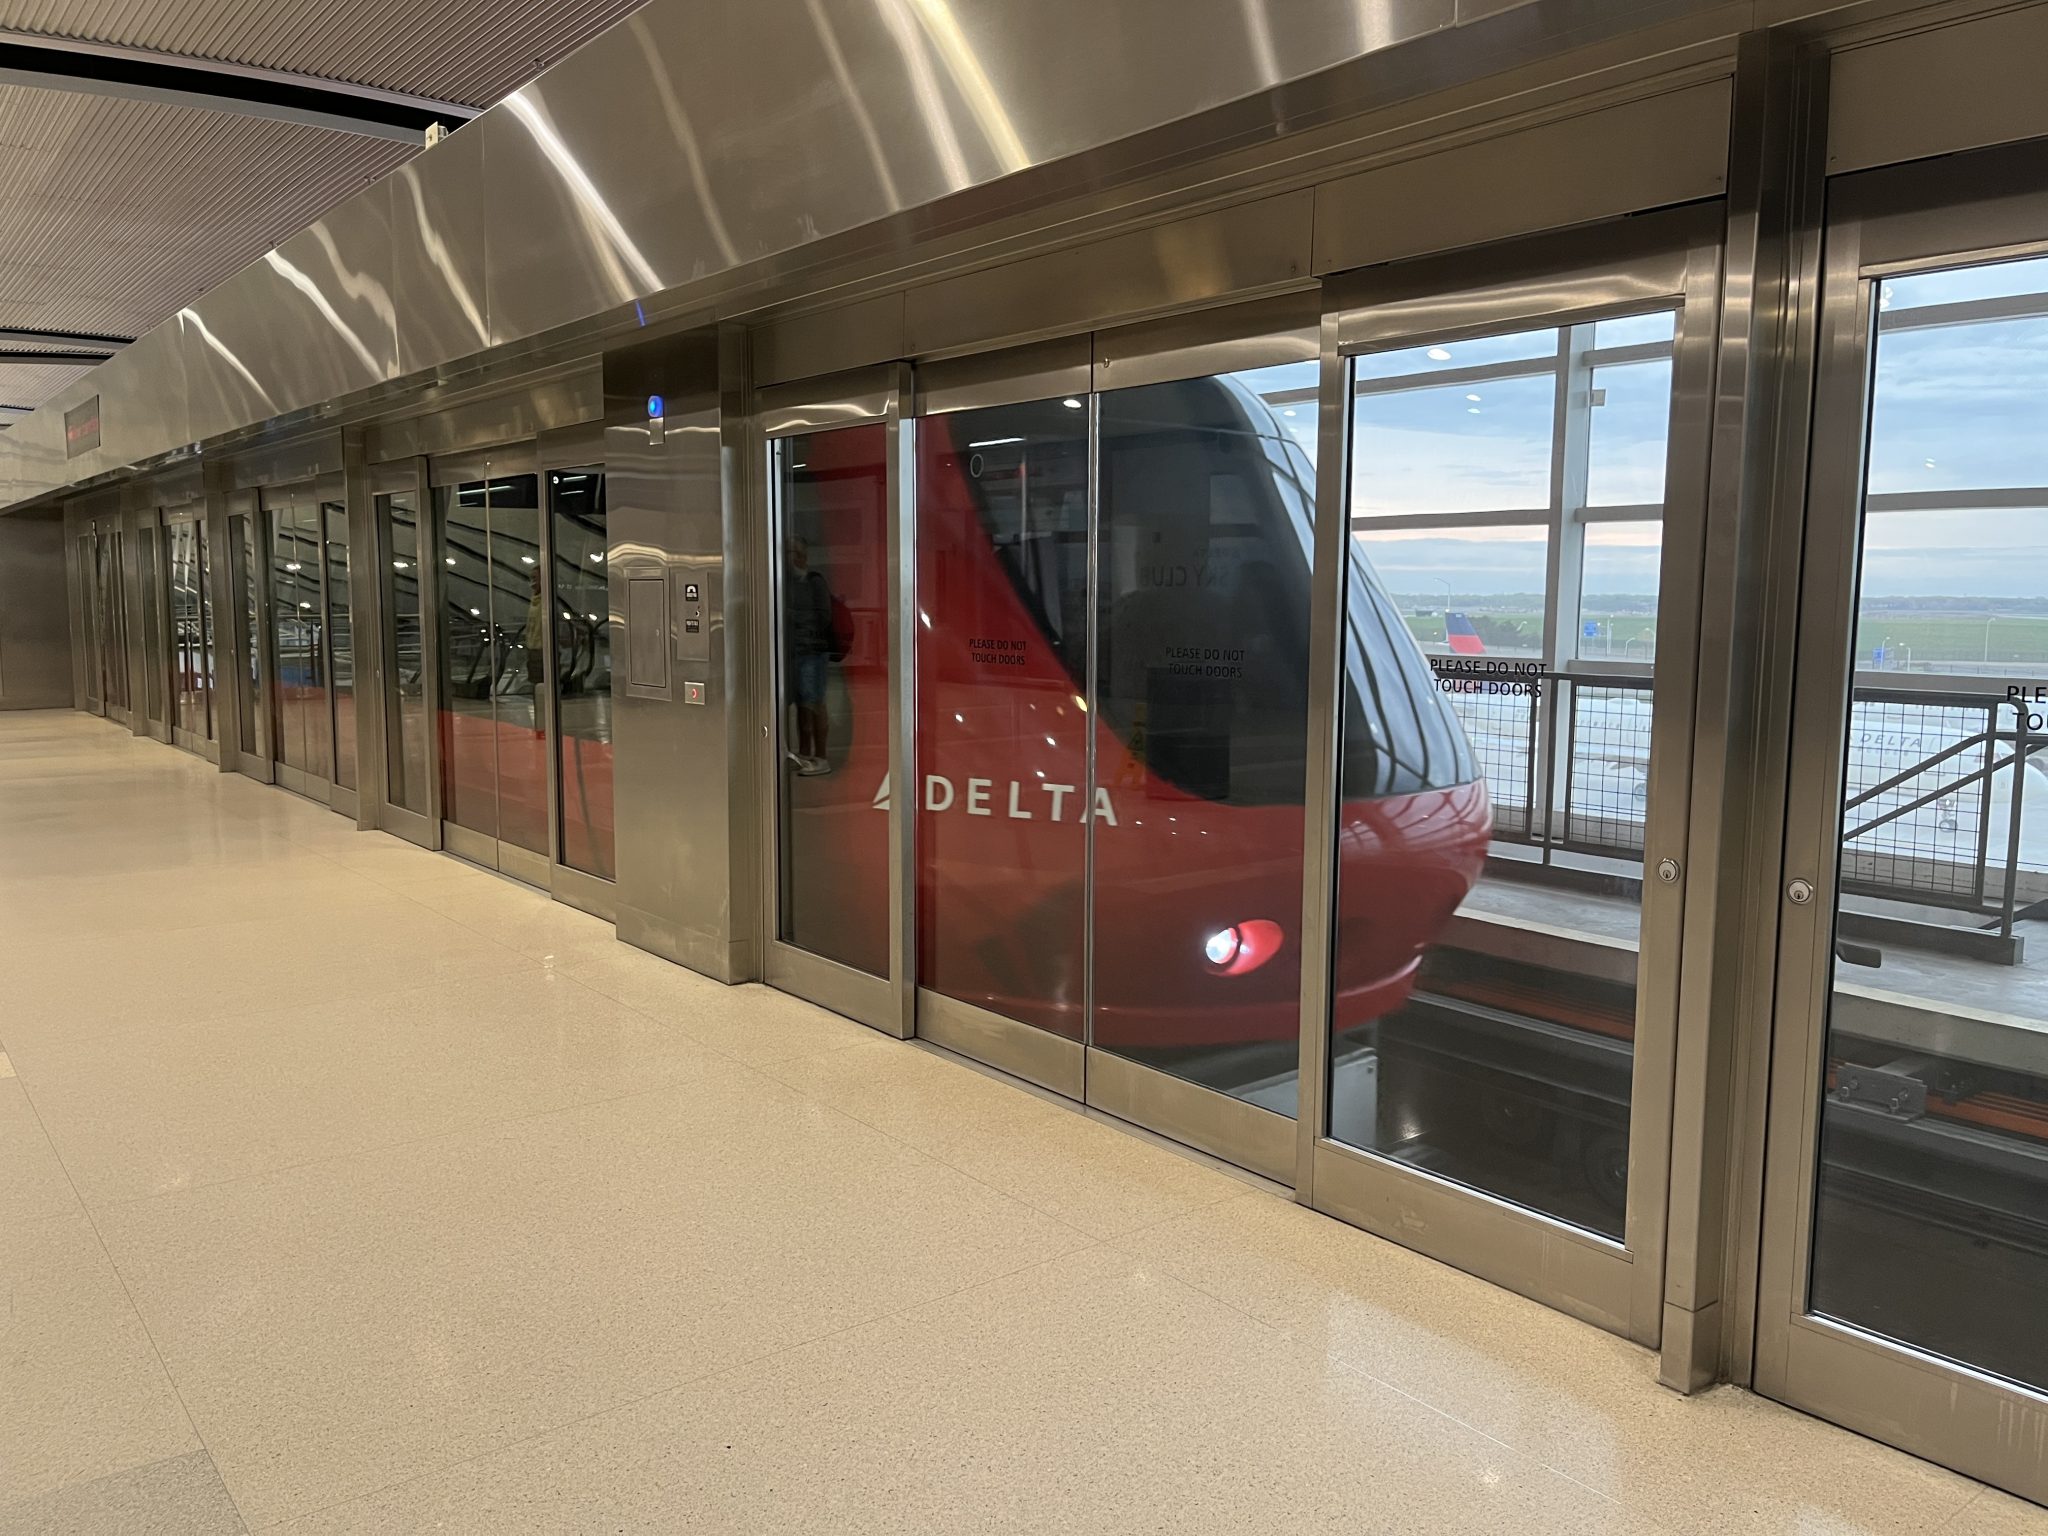 Red commuter train coming into the station inside the Detroit airport. Nose of the train visible through glass doors.